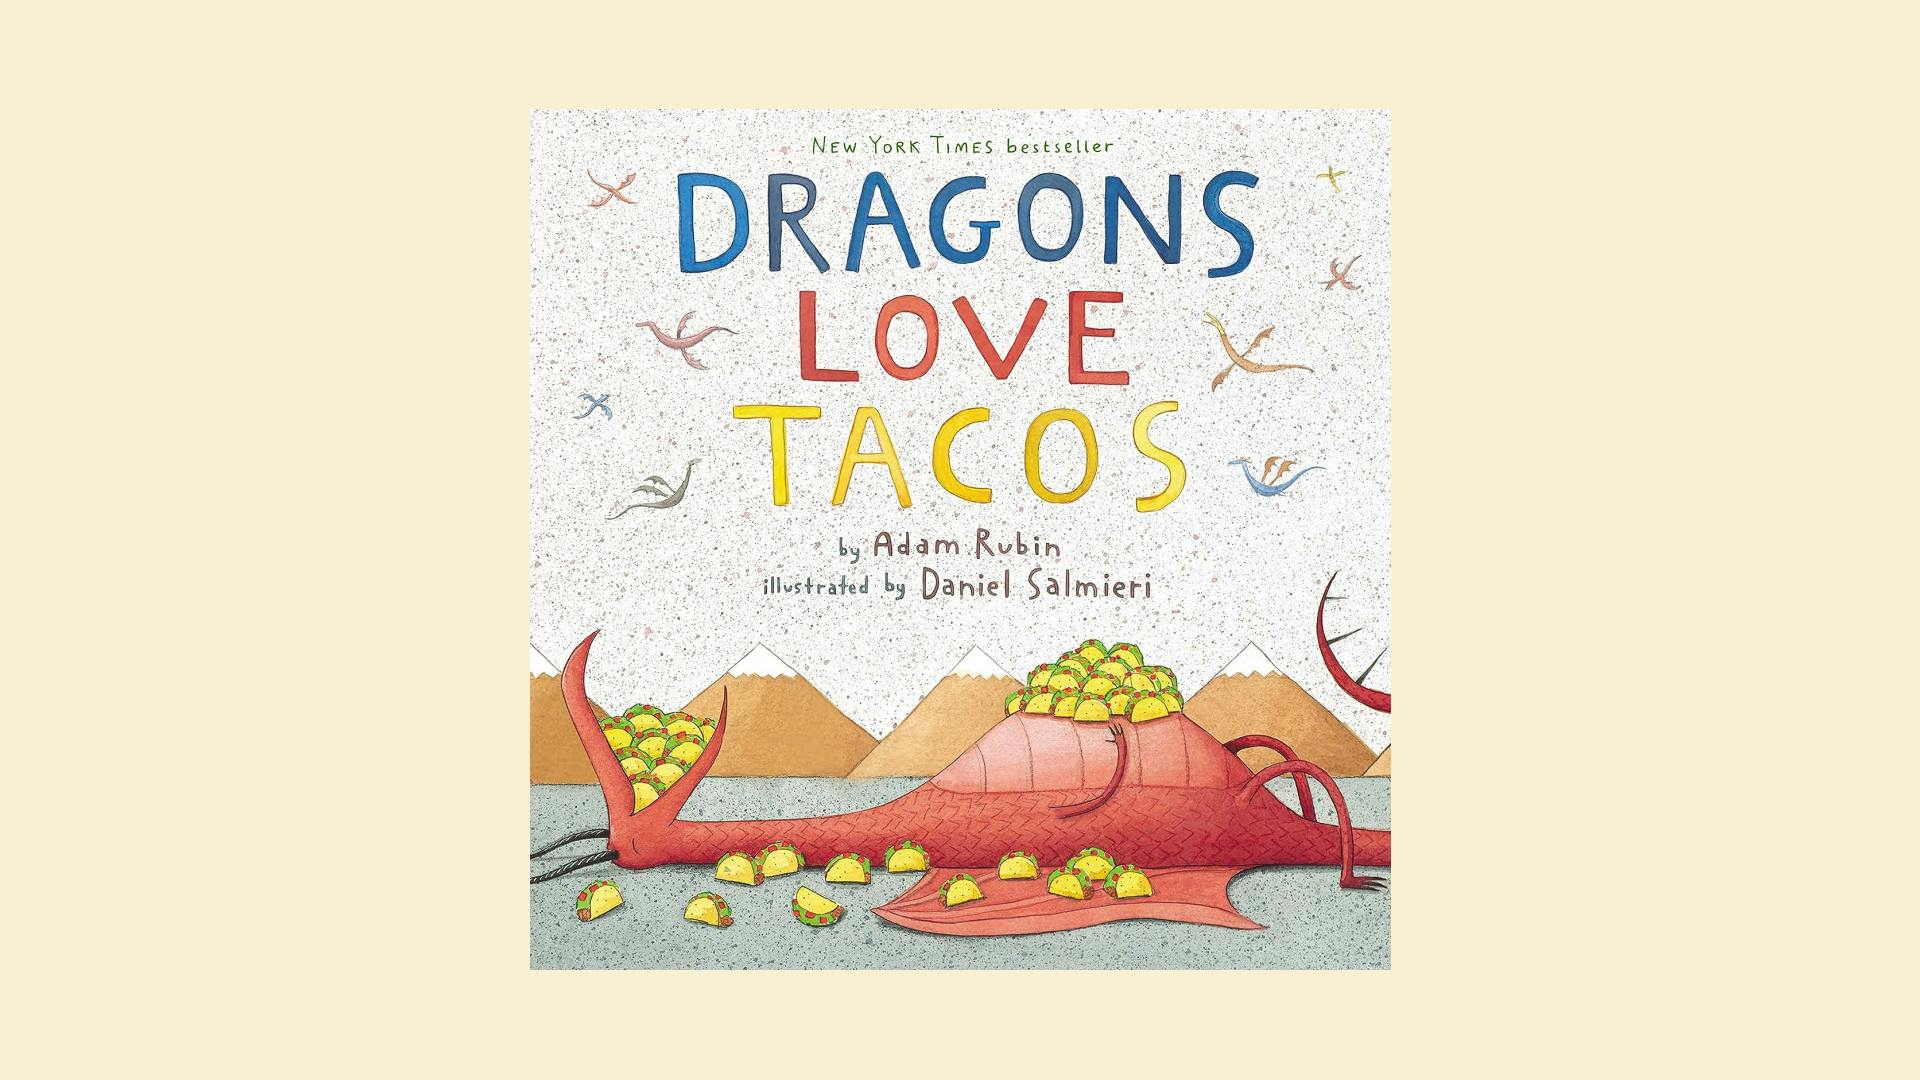 The perfect book for kids who love dragons, tacos, or both